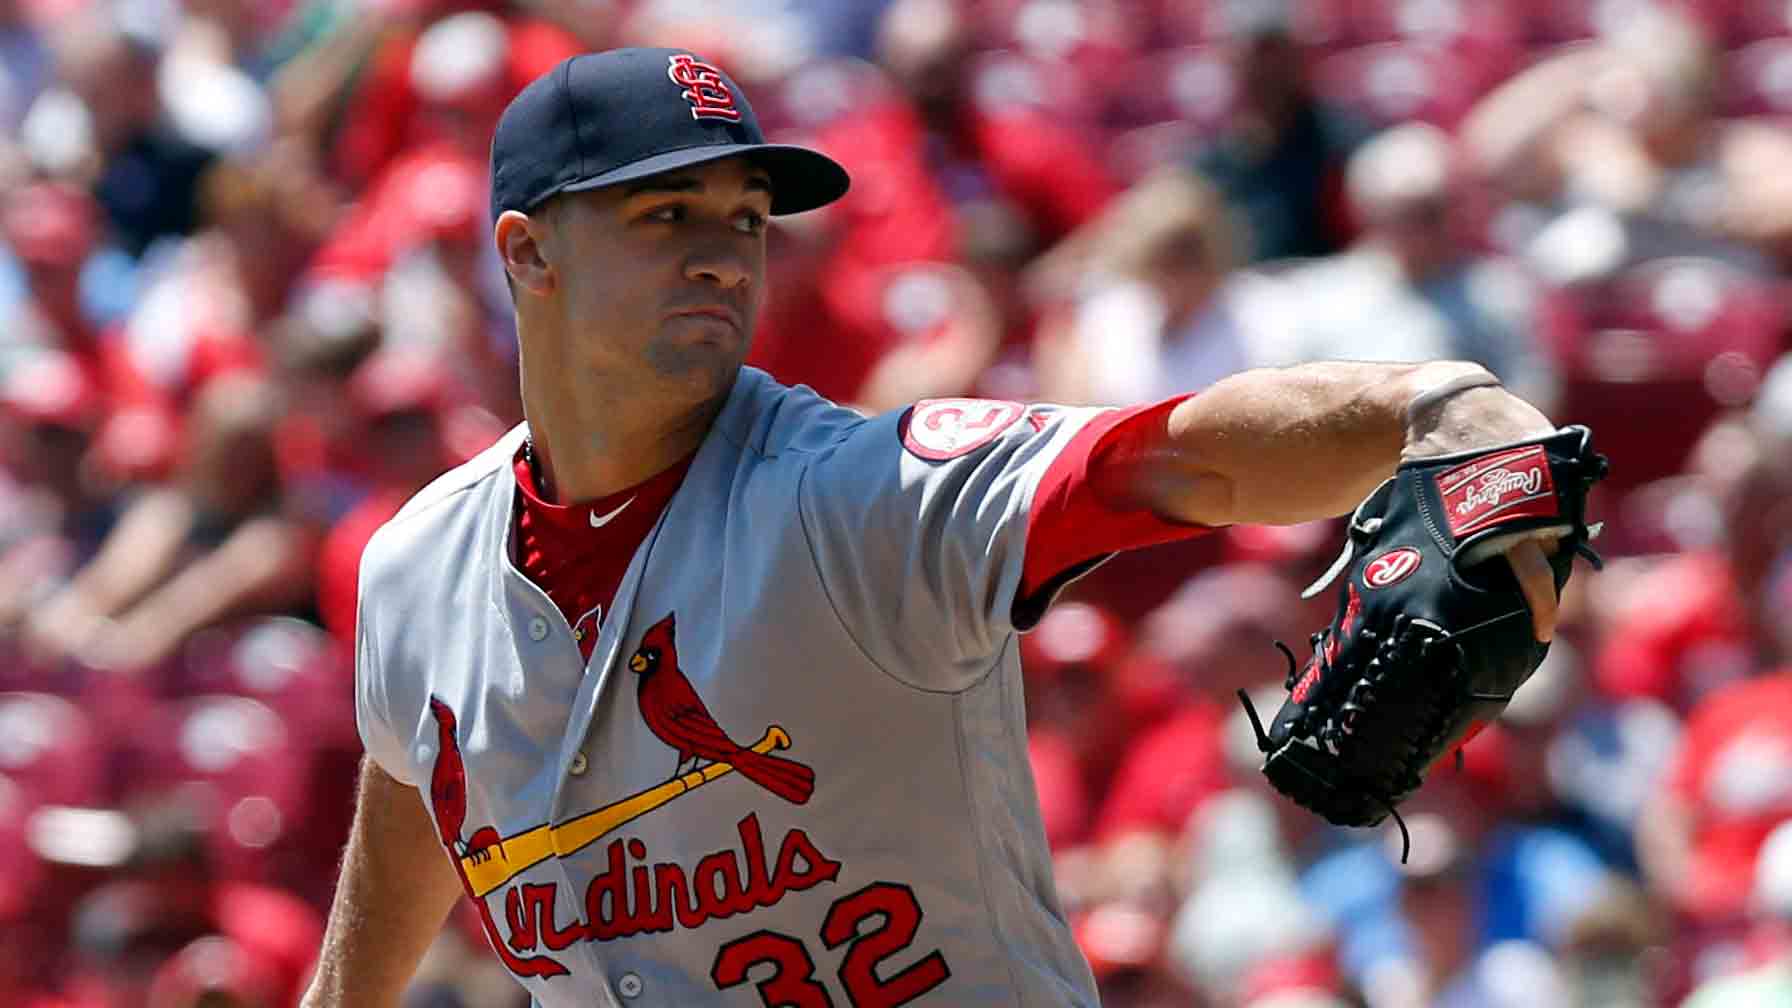 Cardinals give up game, series to Reds in falling 7-3